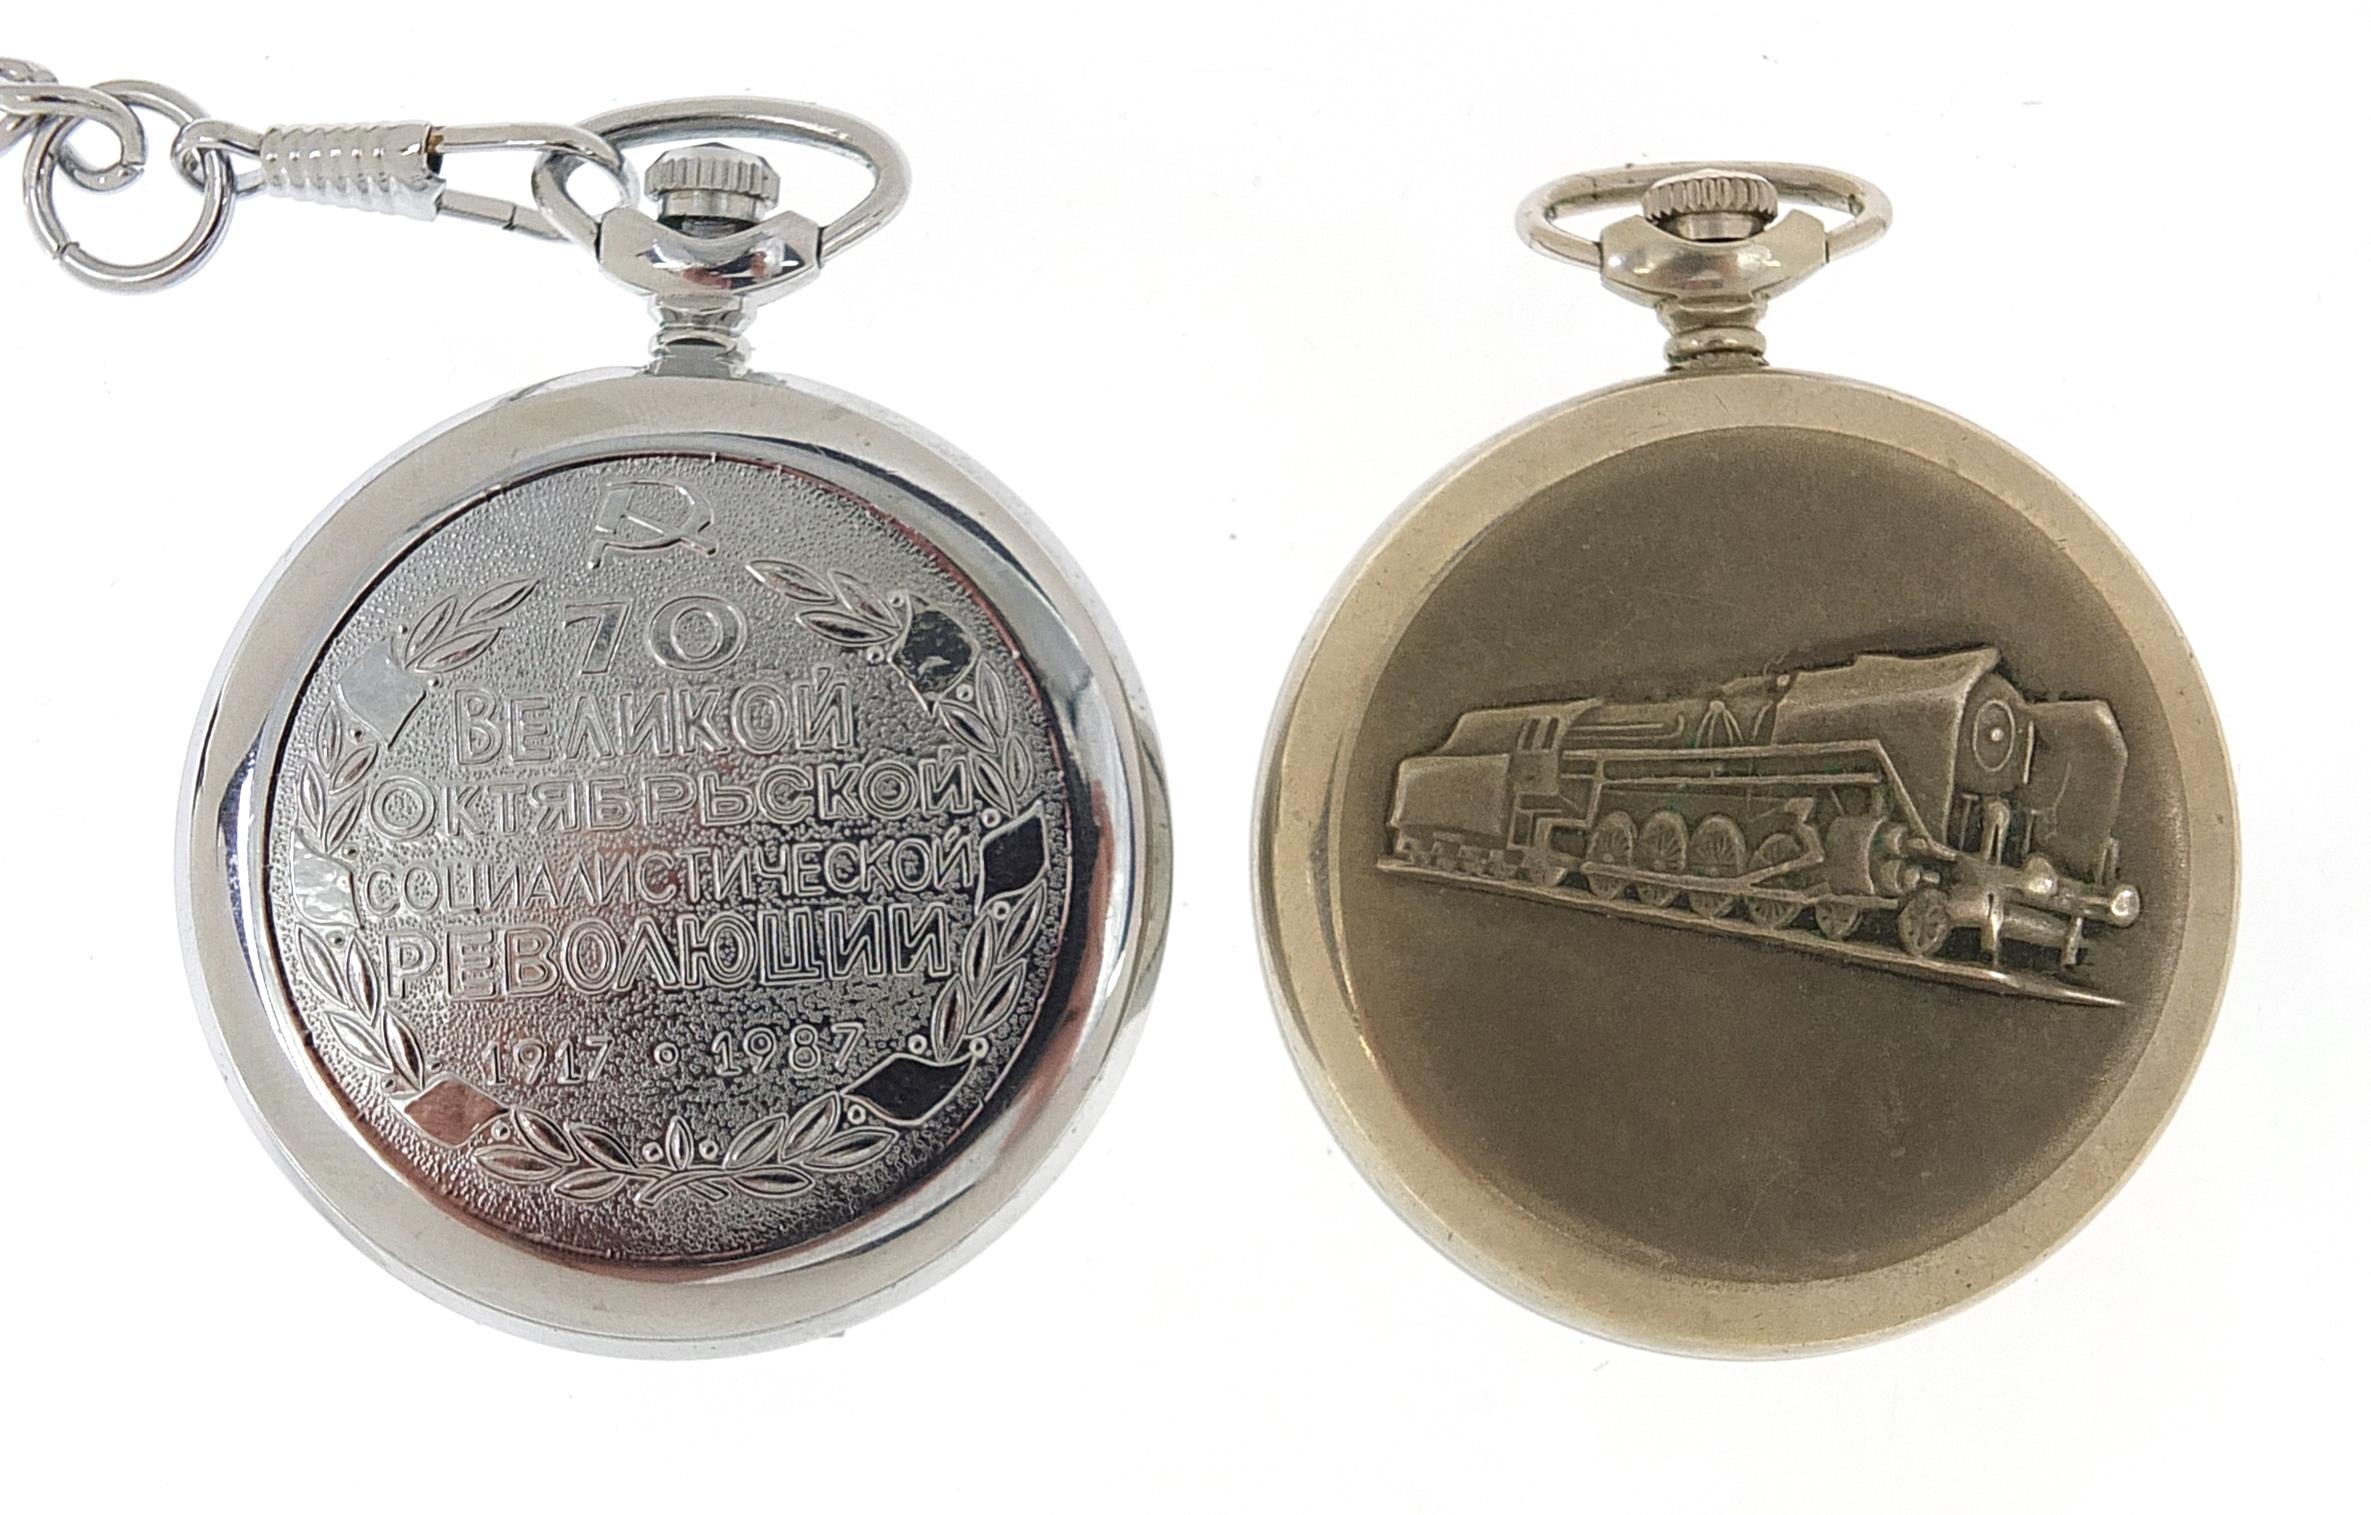 Two Russian railway and shipping interest pocket watches, each 50mm in diameter - Image 3 of 5